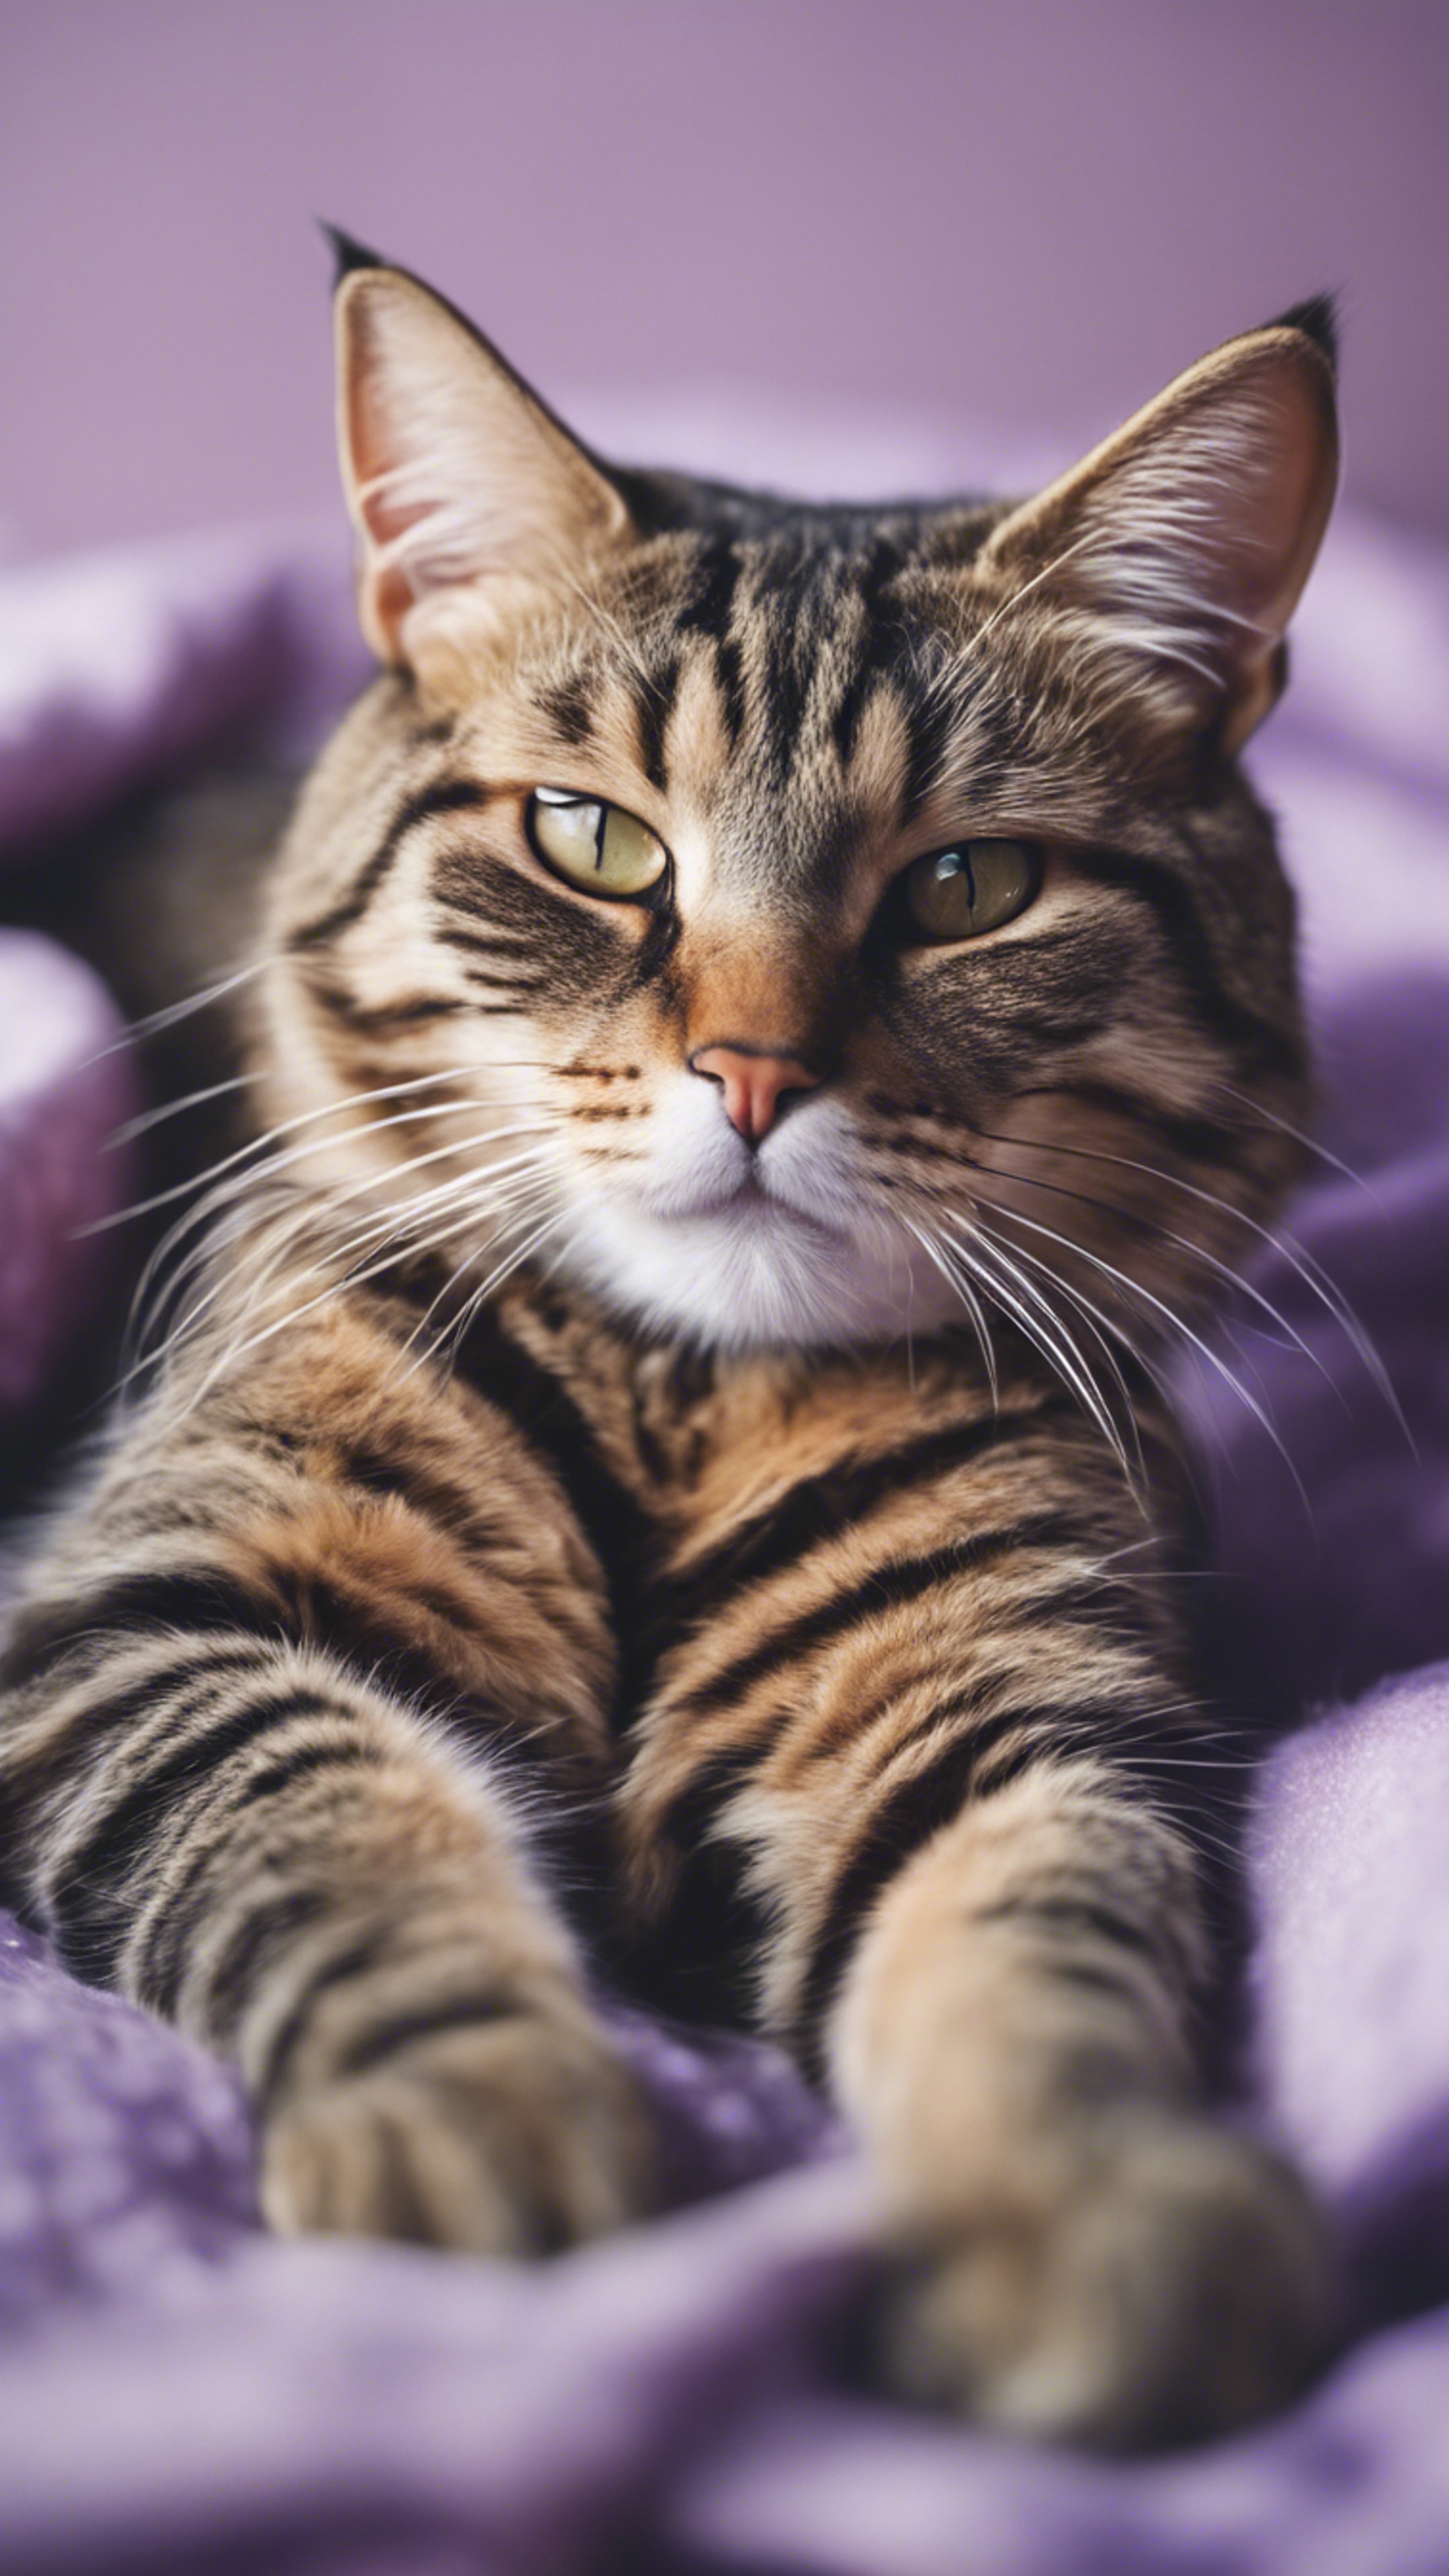 A candid portrait of a tabby cat lounging on a pastel purple blanket. Sfondo[f4cf510d1a1d426195dc]